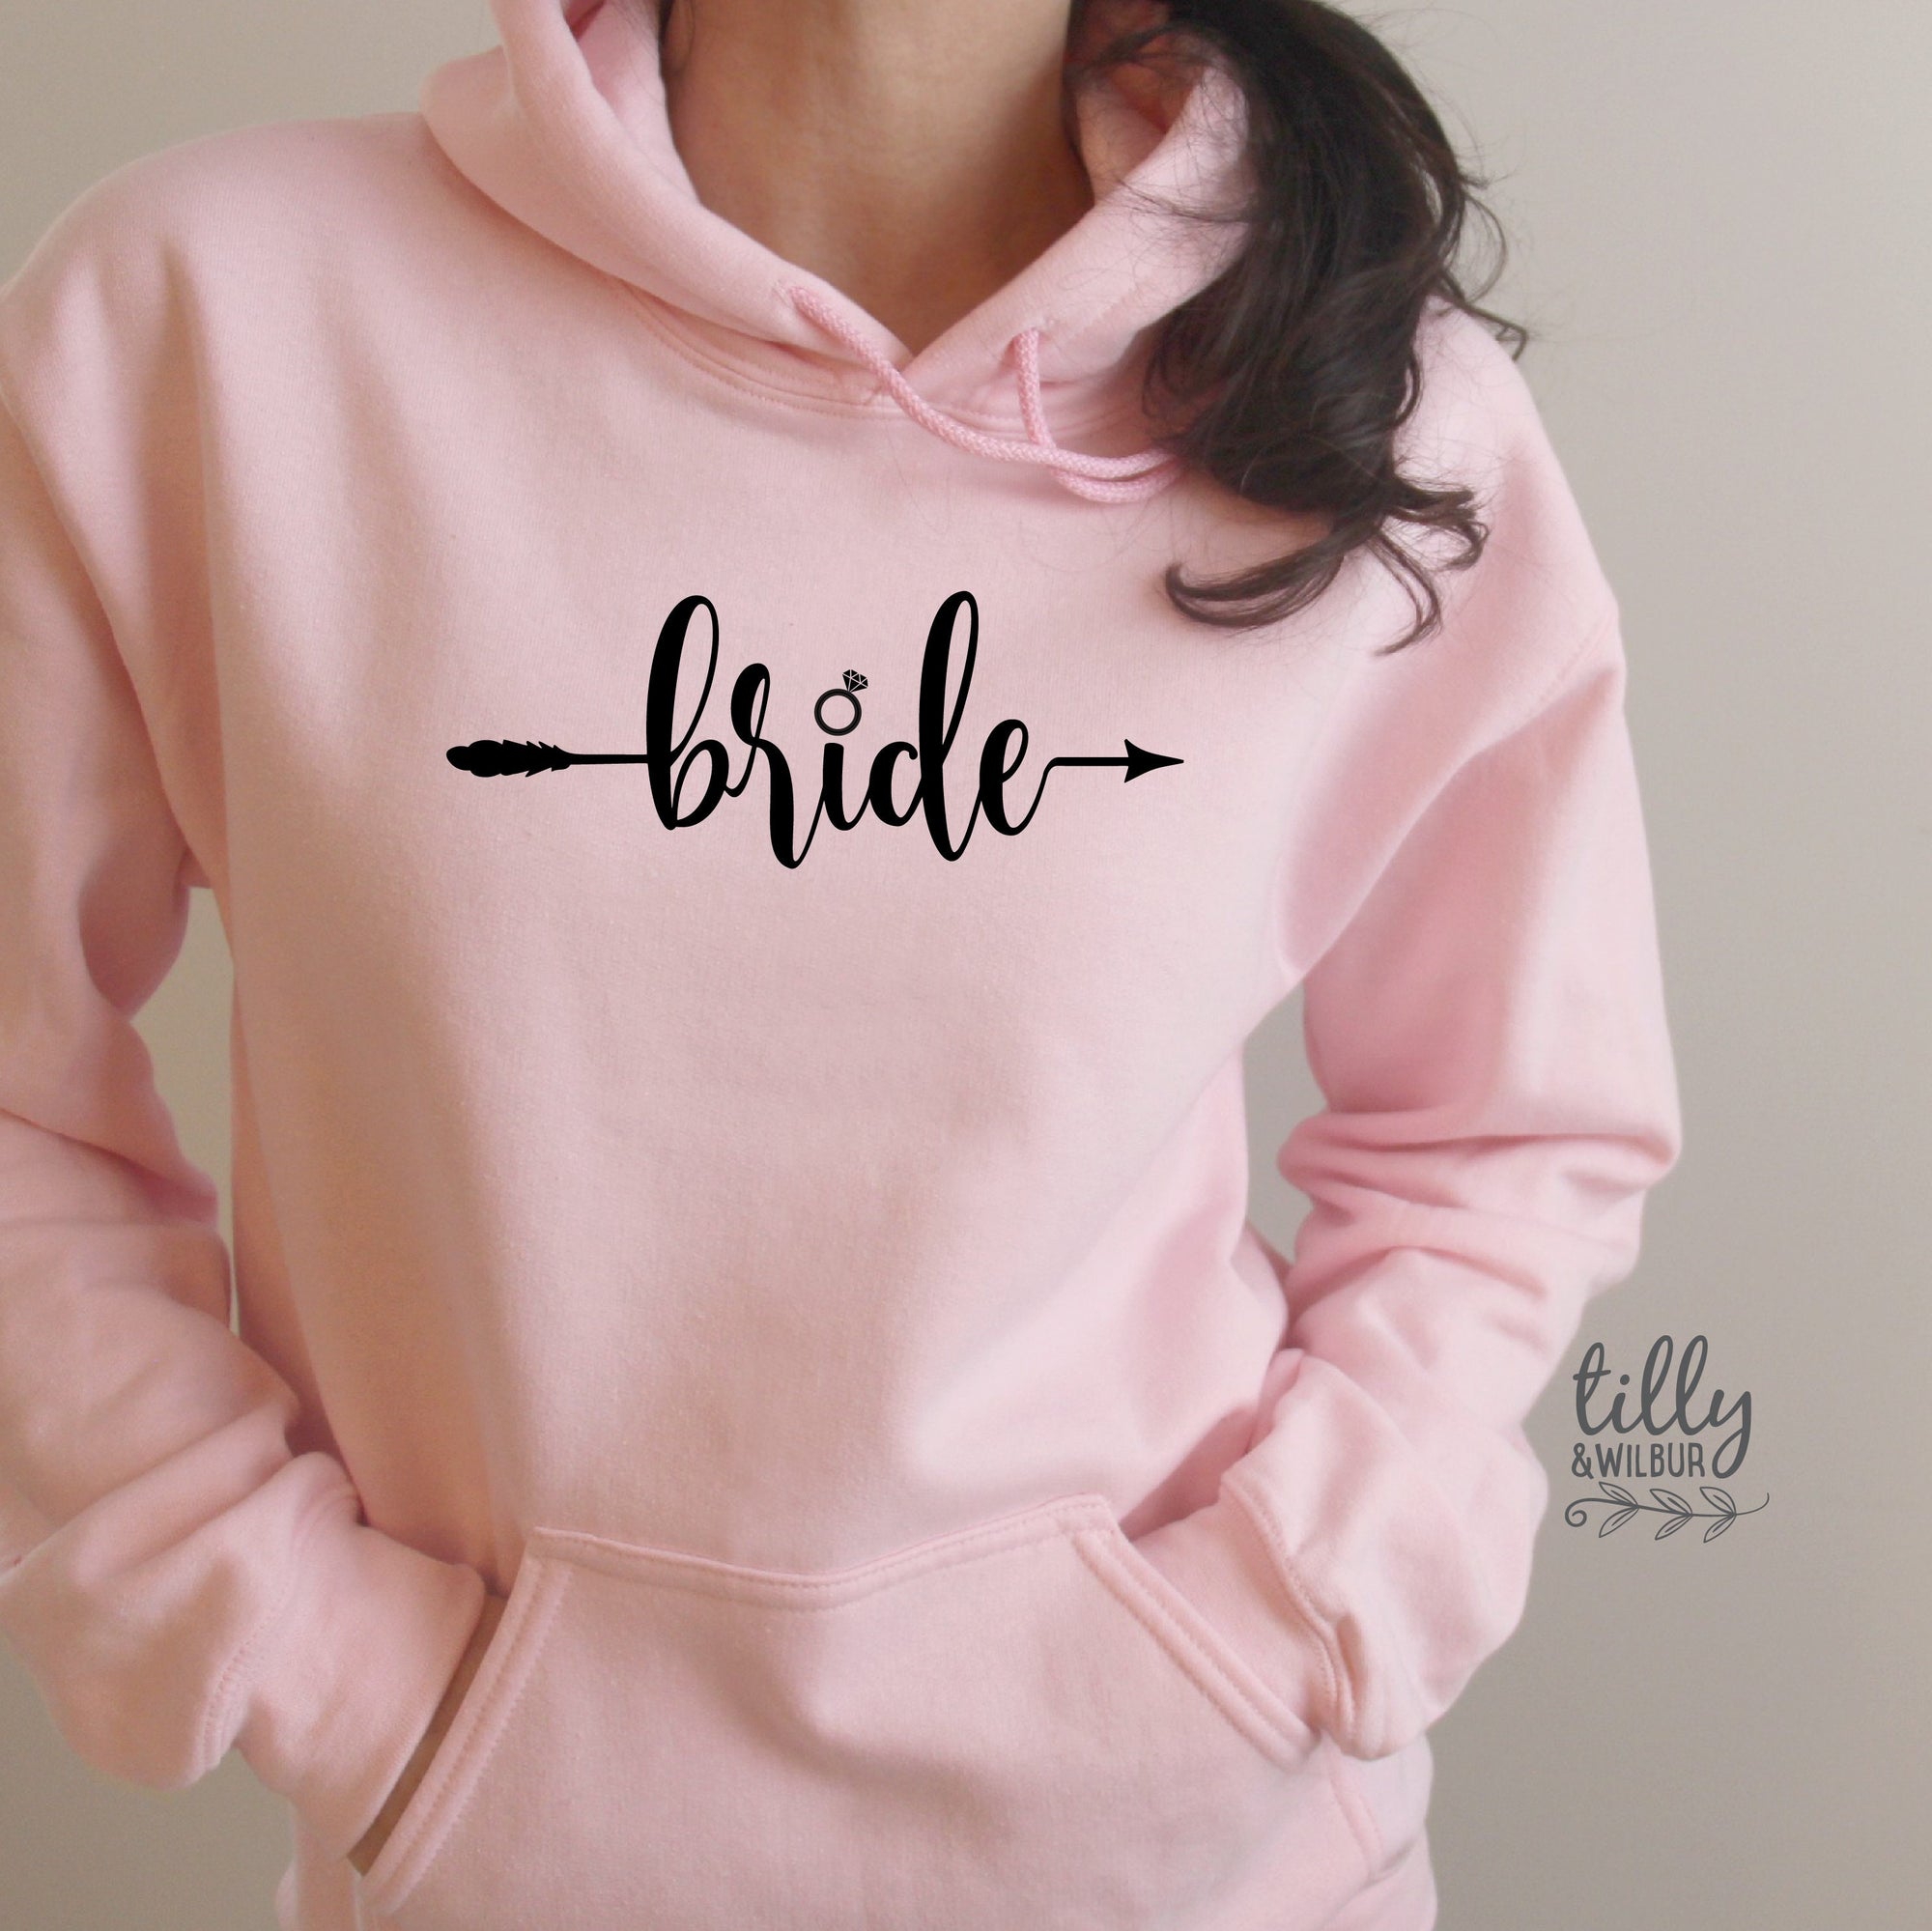 Bride Women's Hoodie, Wedding Gift, Wedding Party, Bridal Party, Newlywed, His and Hers, Bride T-Shirt, Hens Night, Bride-To-Be, Bride Tee